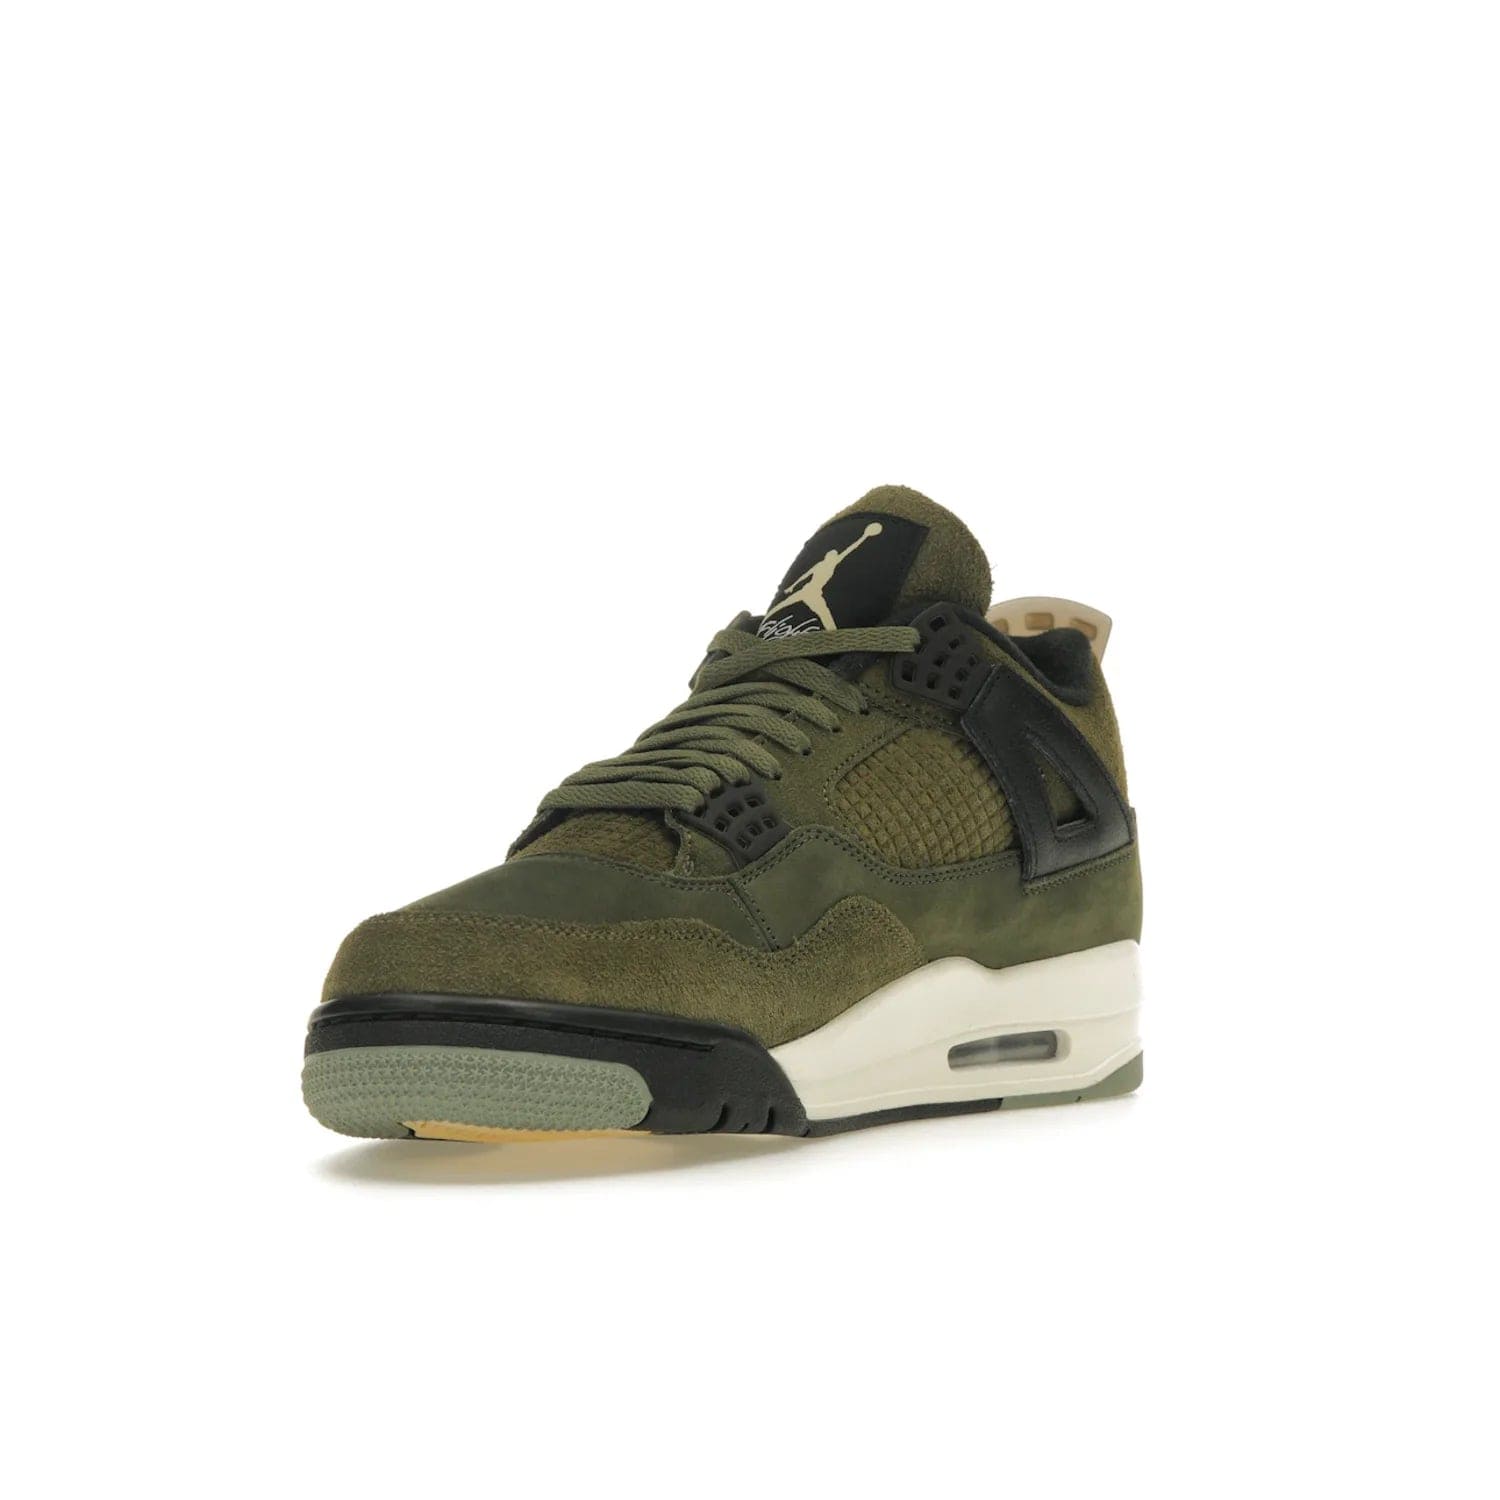 Jordan 4 Retro SE Craft Medium Olive - Image 14 - Only at www.BallersClubKickz.com - Grab the Jordan 4 Retro SE Crafts for a unique style. Combines Medium Olive, Pale Vanilla, Khaki, Black and Sail, with same classic shape, cushioning, and rubber outsole. Available on November 18th!